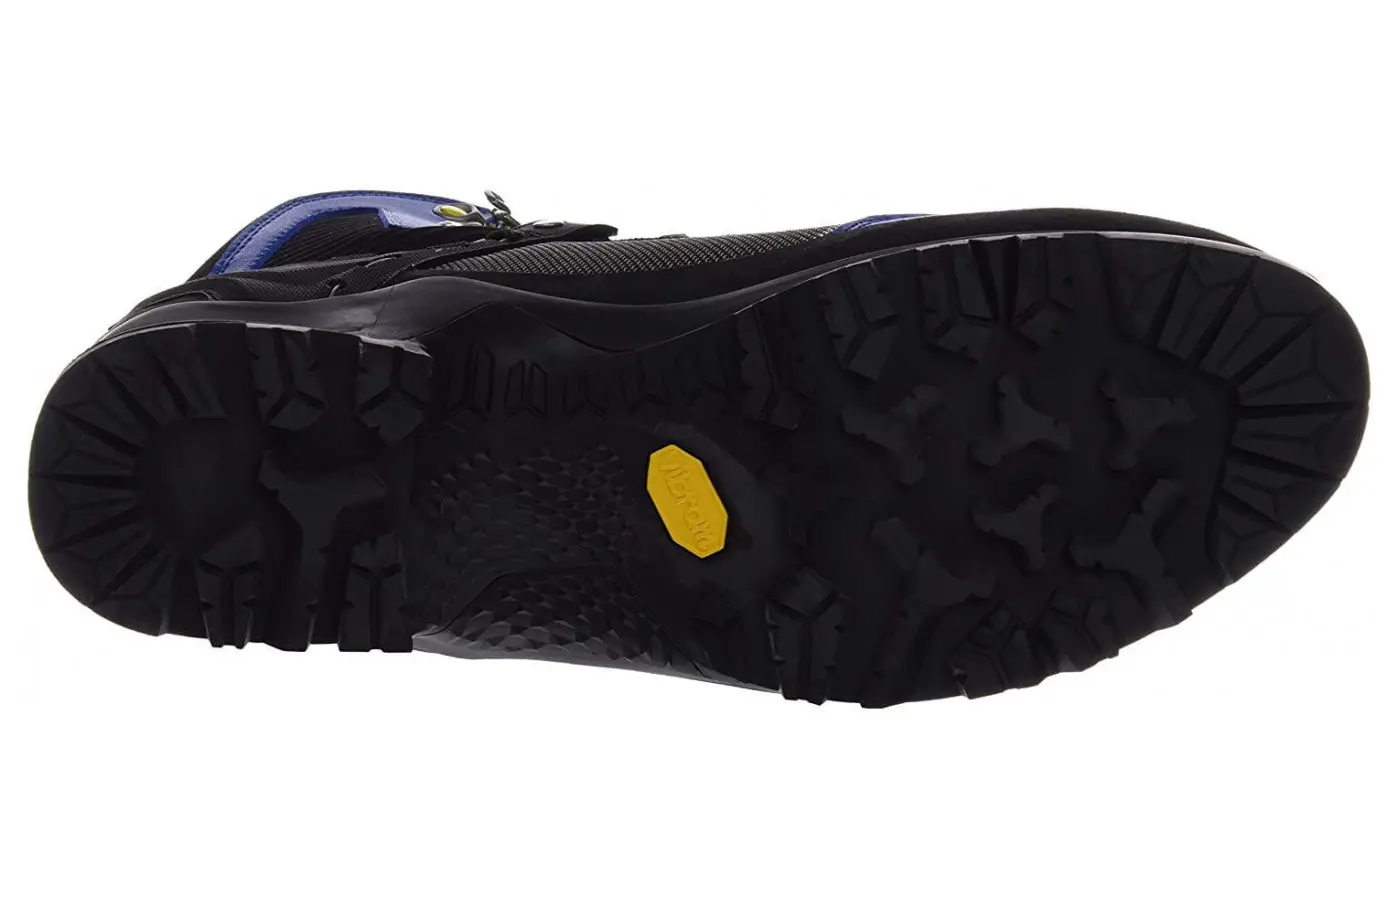 The purpose of an outsole made of such a grip-worthy material is for surefootedness. 